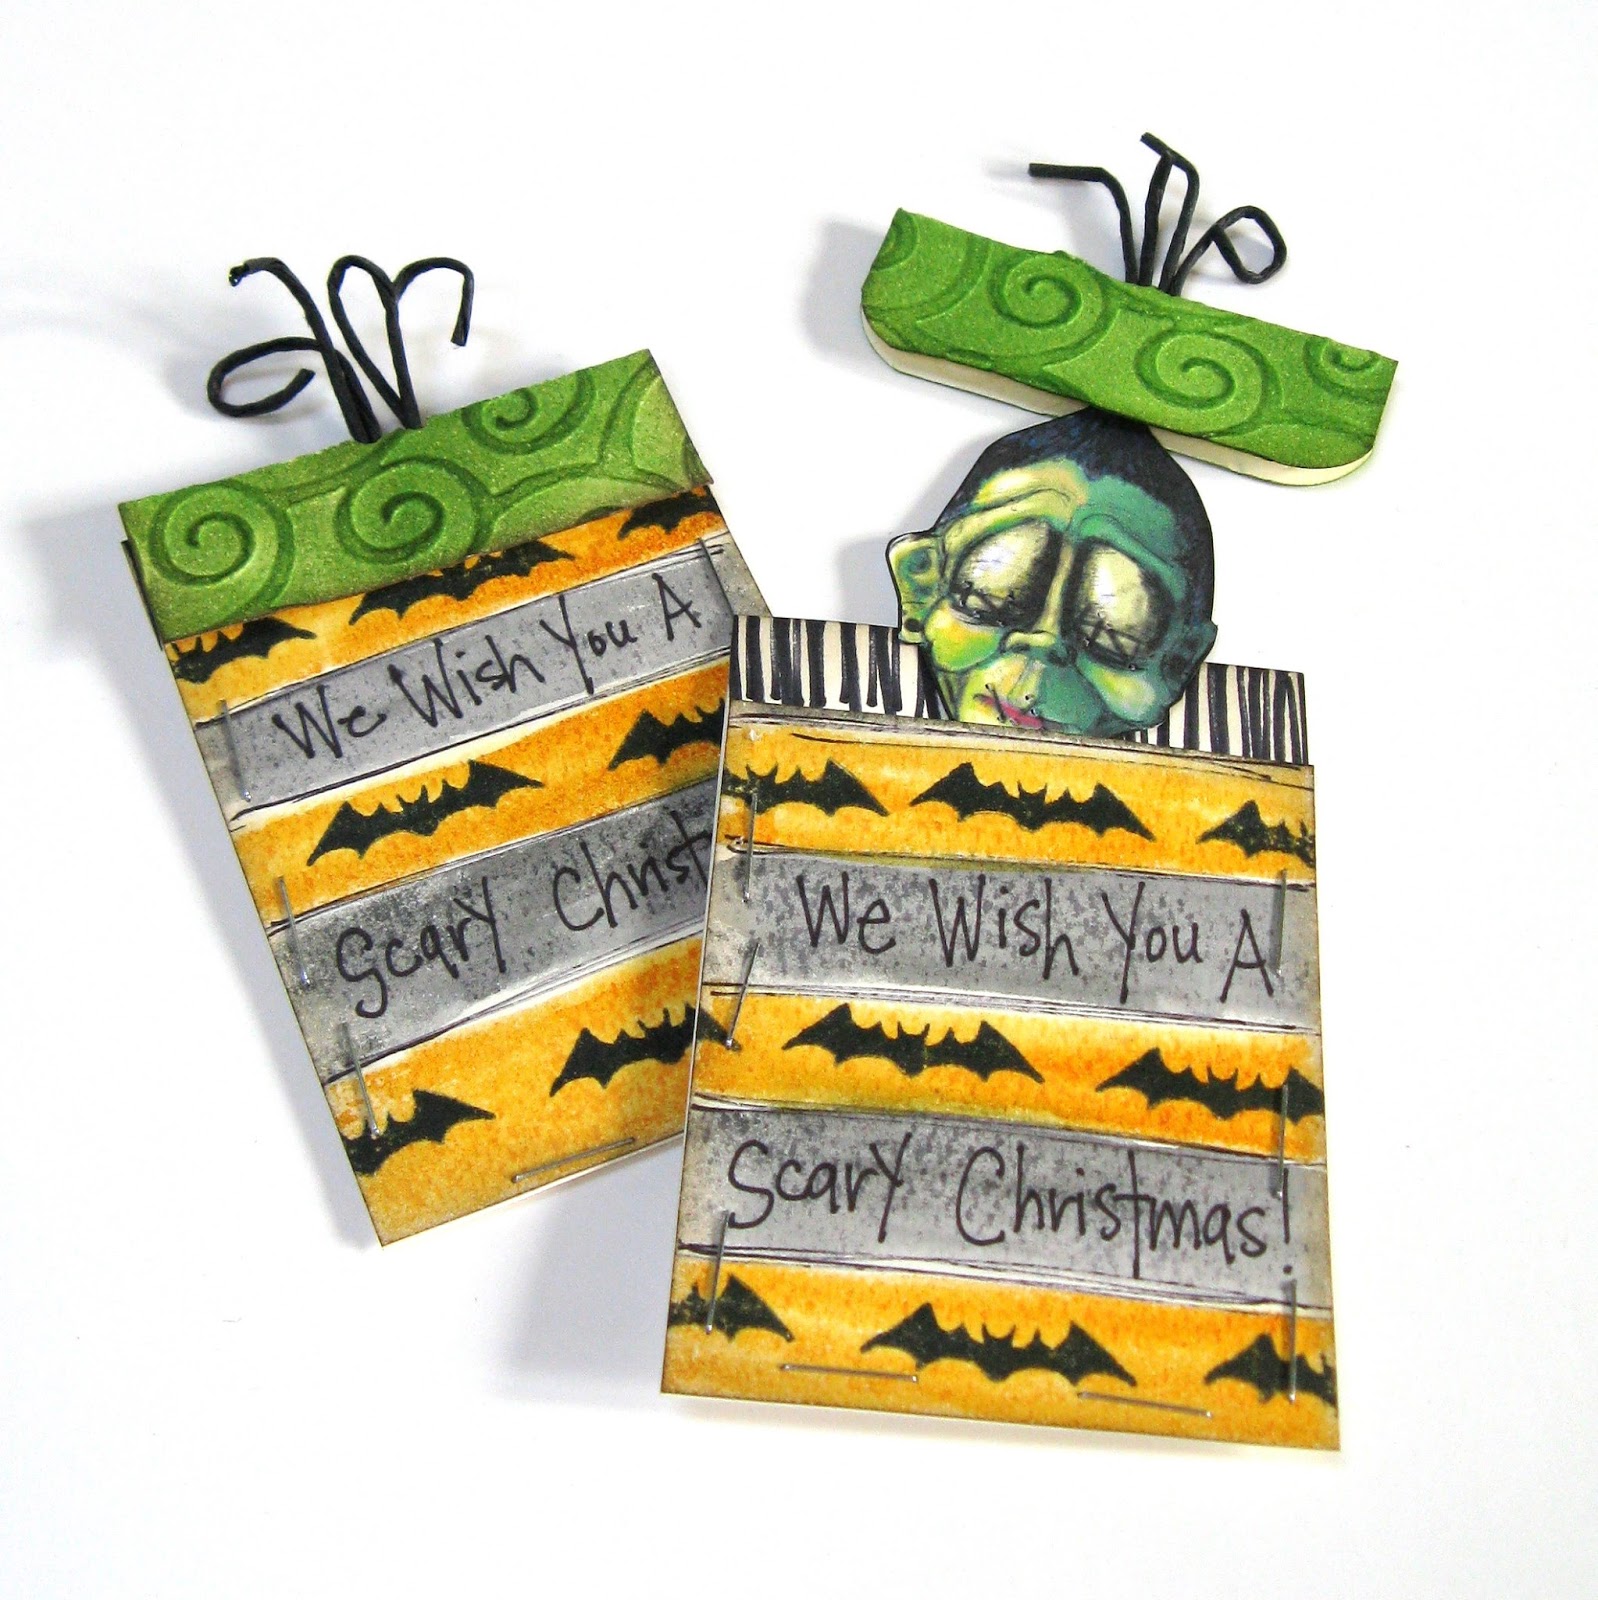 Elves In The Attic: Nightmare Before Christmas Goodies